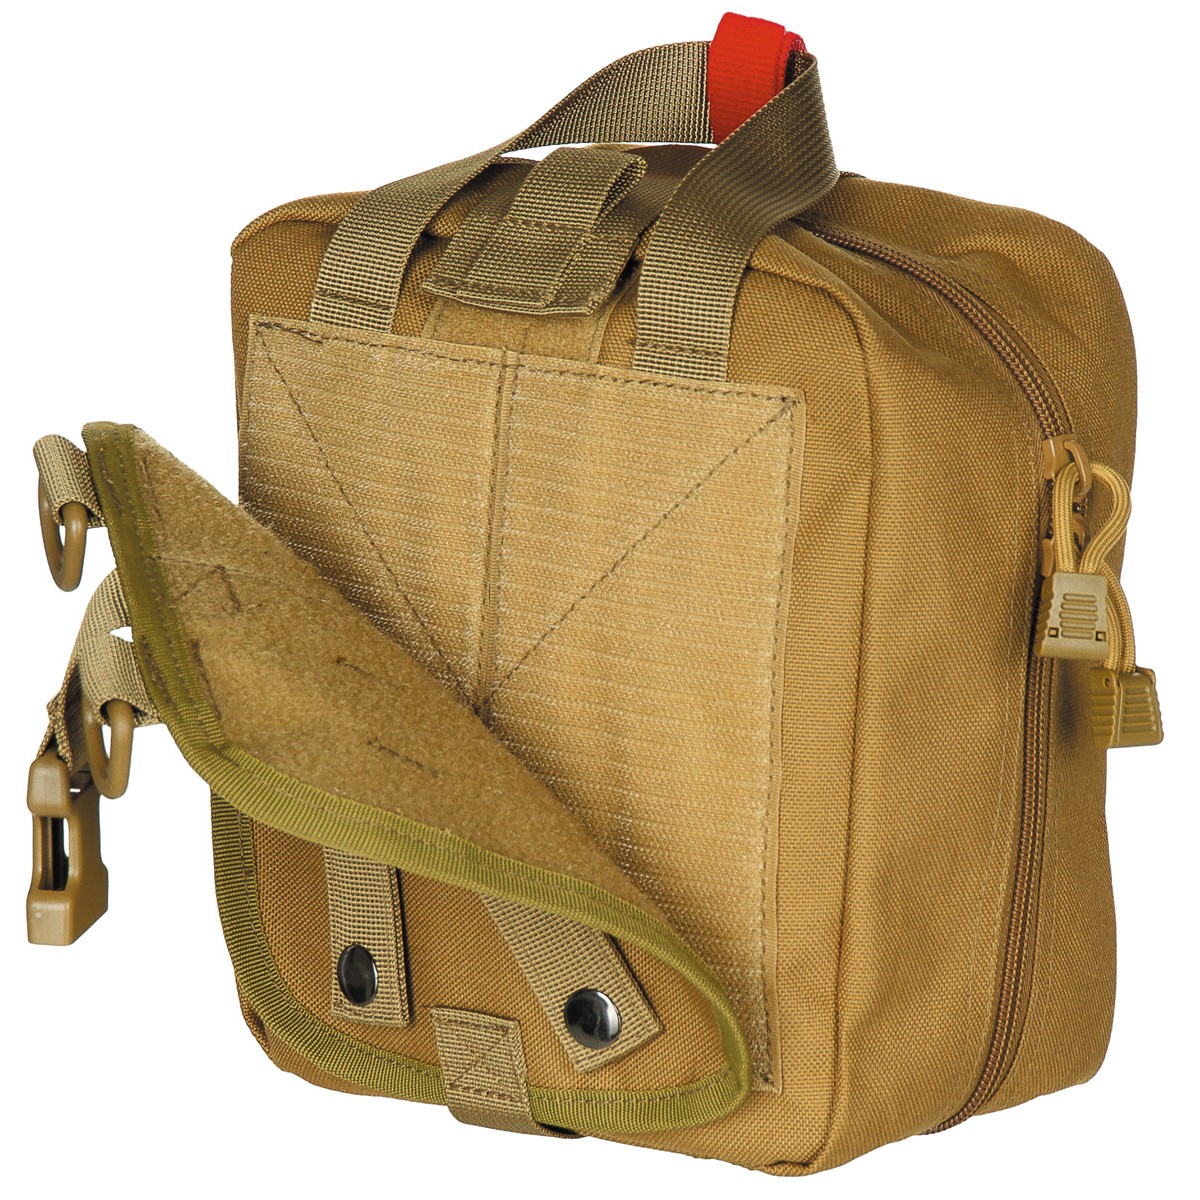 Tasche groß Erste Hilfe Molle coyote - Outdoor-Checkpoint